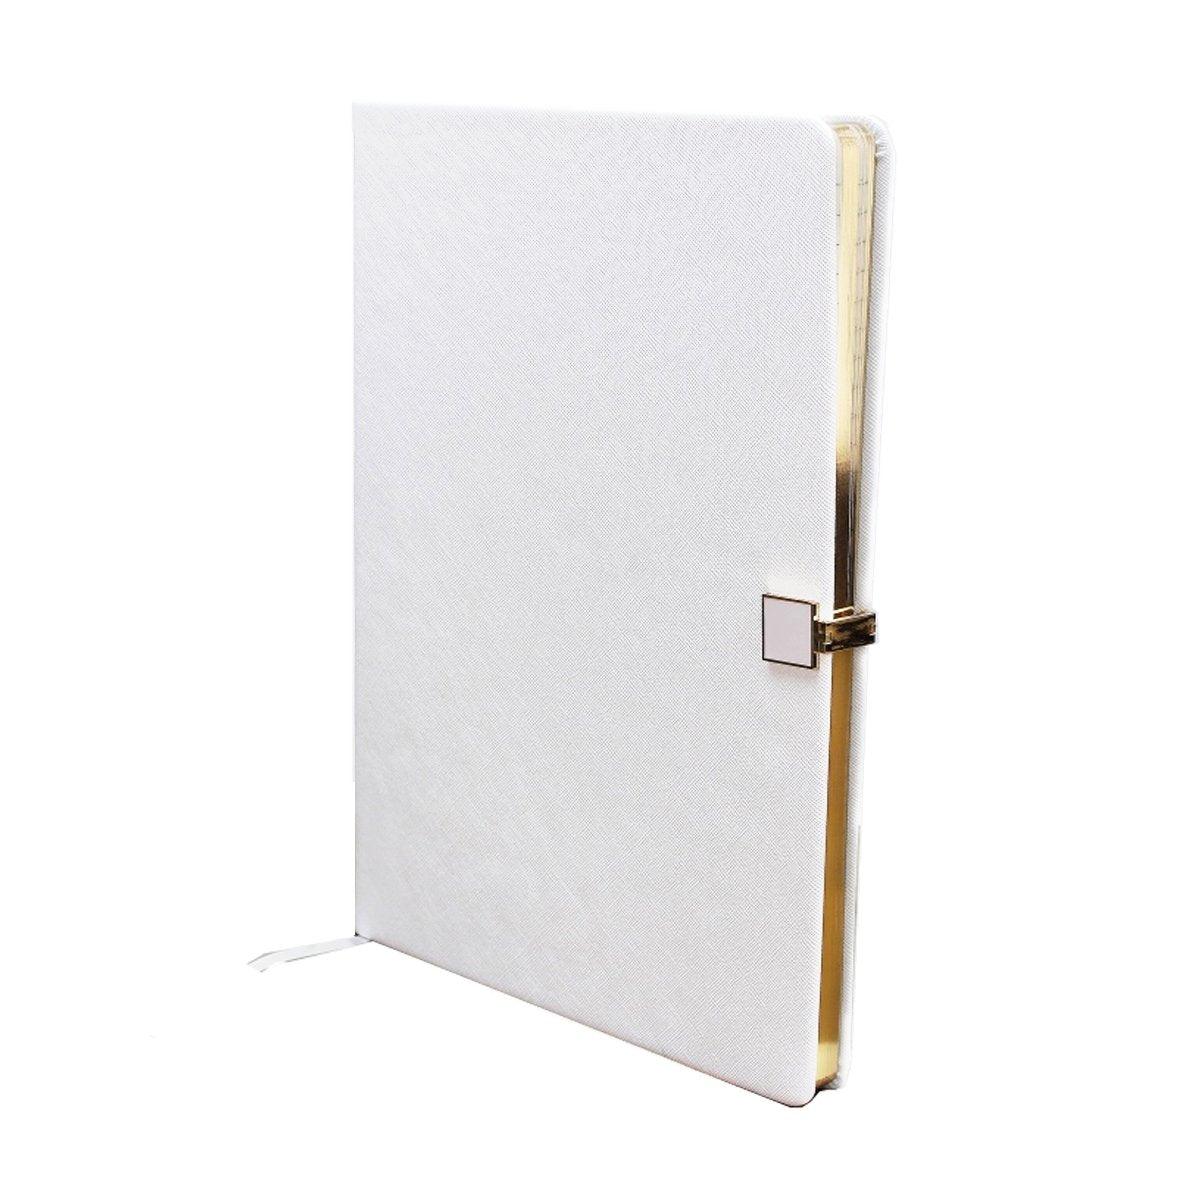 Addison Ross Notebook A4 with Gold by Addison Ross